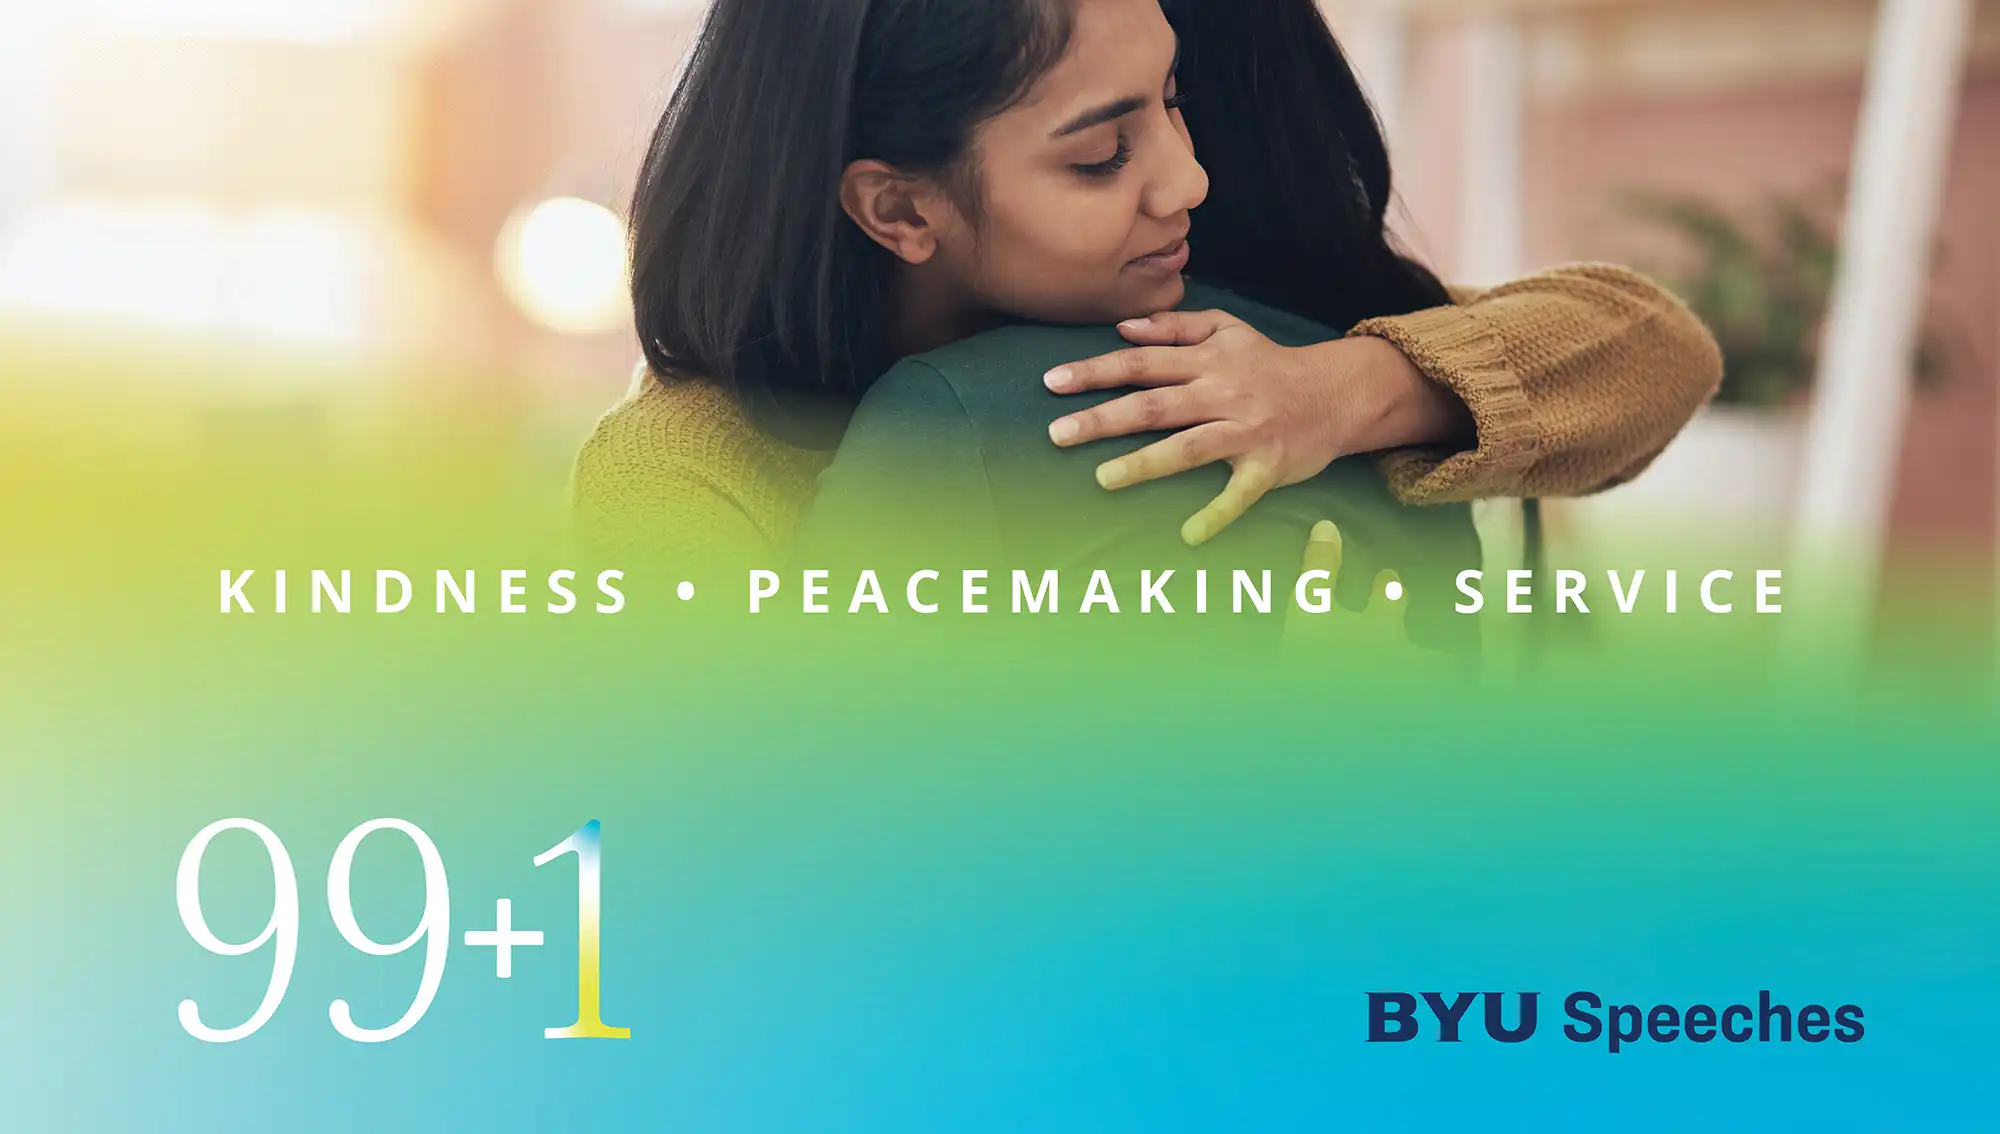 Peacemaking, Kindness, Service, 99+1, BYU Speeches. Person hugging.